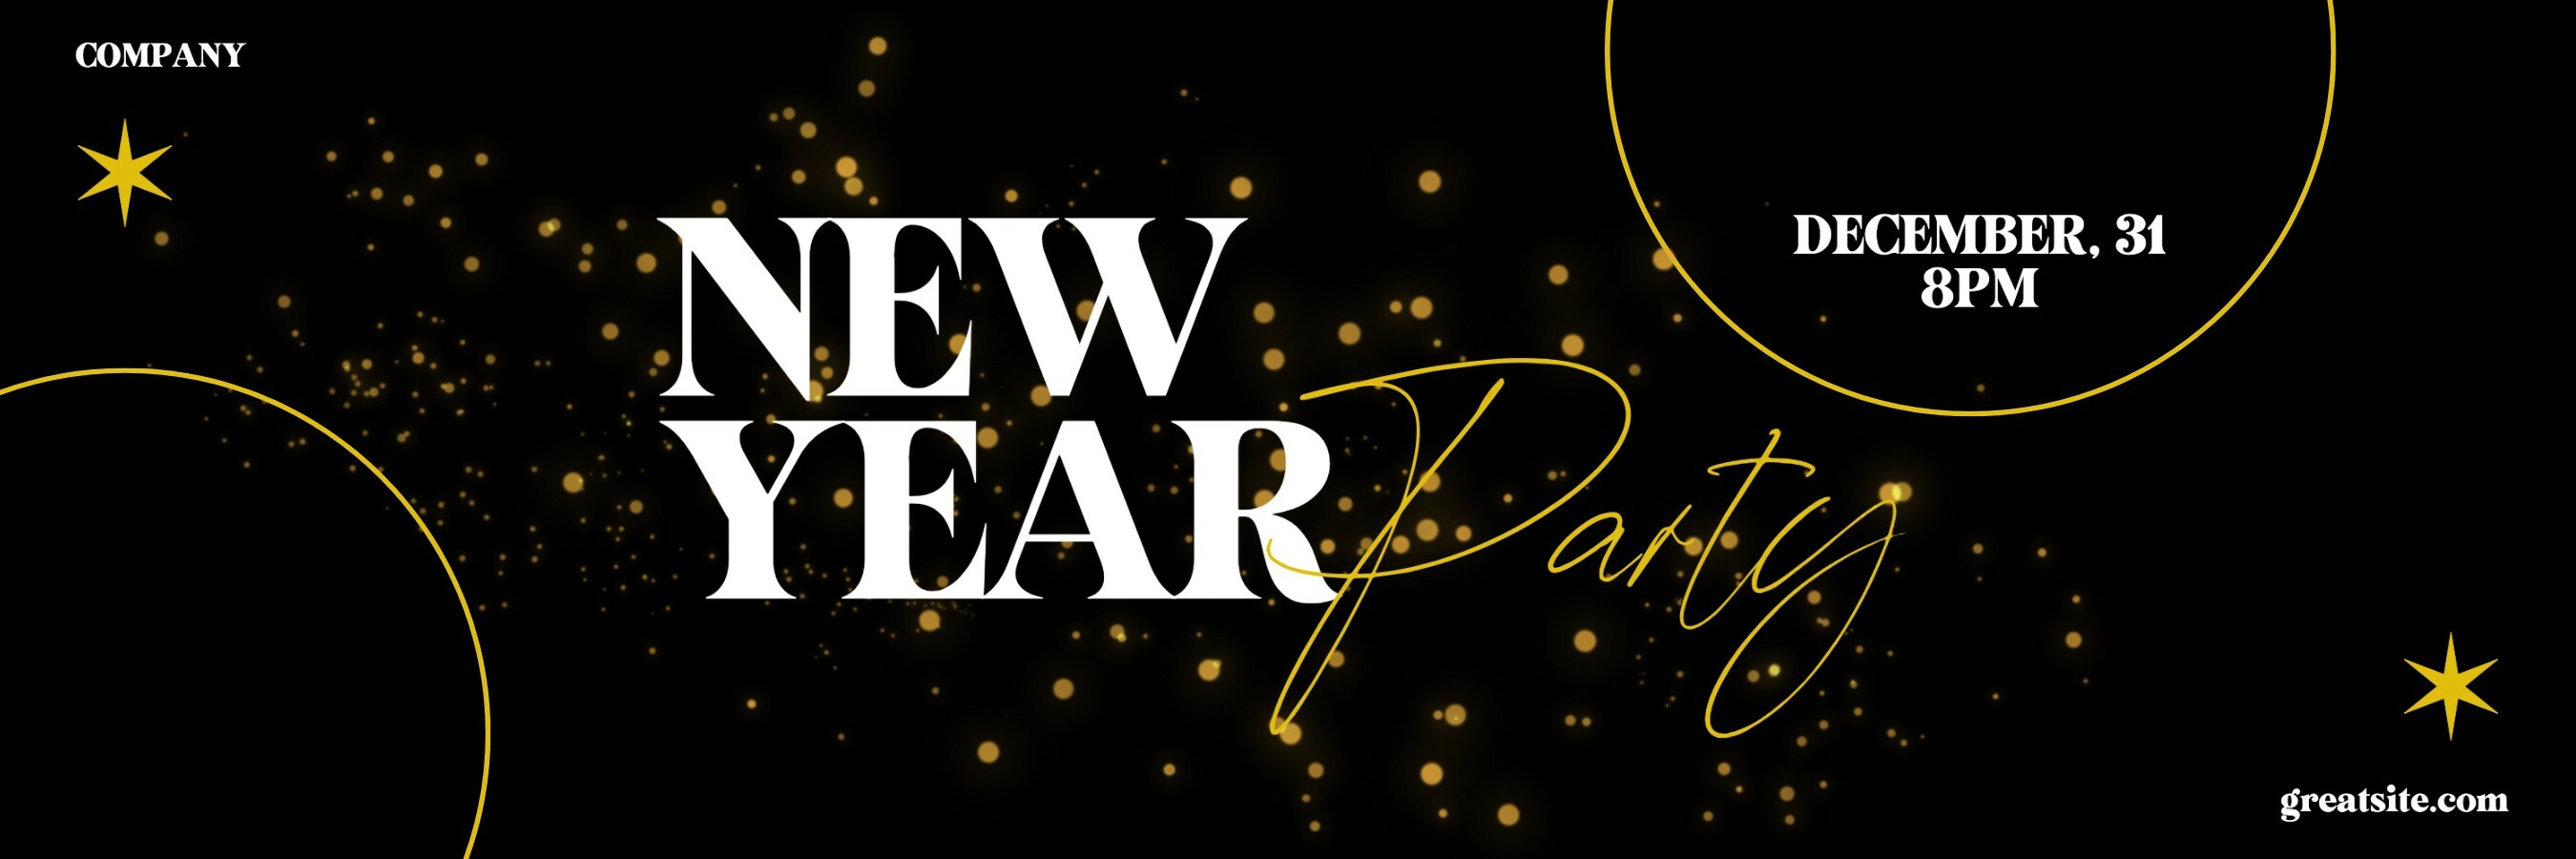 New Year Party Twitter Header